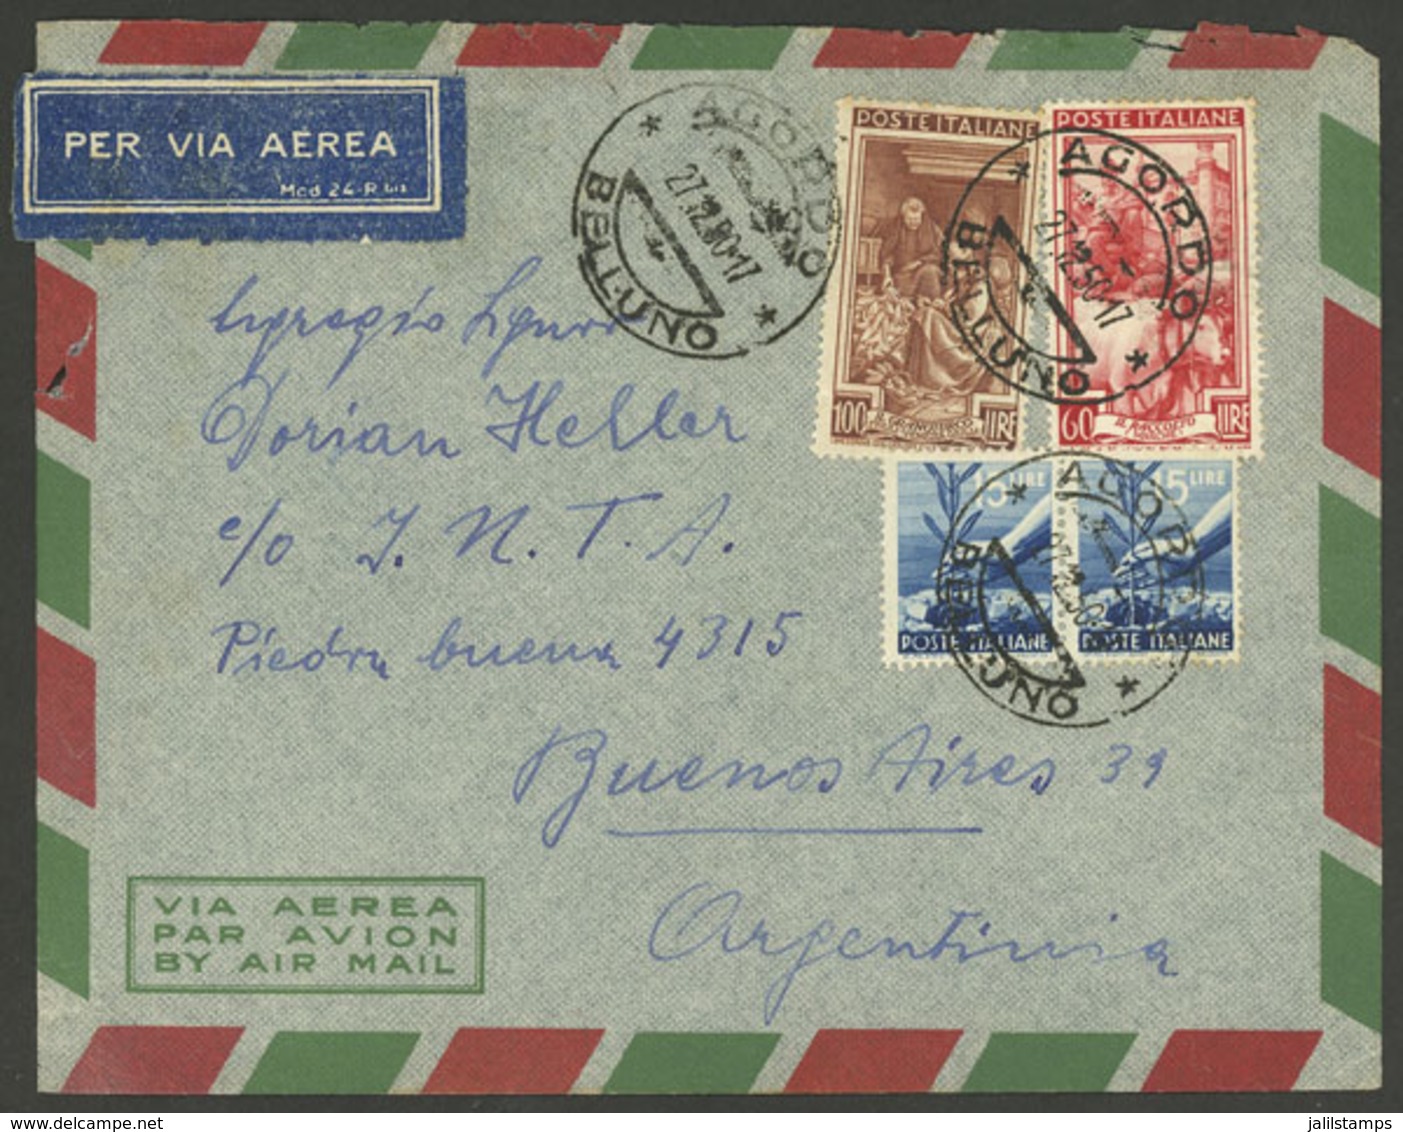 ITALY: 27/DE/1950 Agordo - Argentina, Airmail Cover With Mixed Postage Democratica + Lavoro (total 190L.), And Arrival B - Non Classés